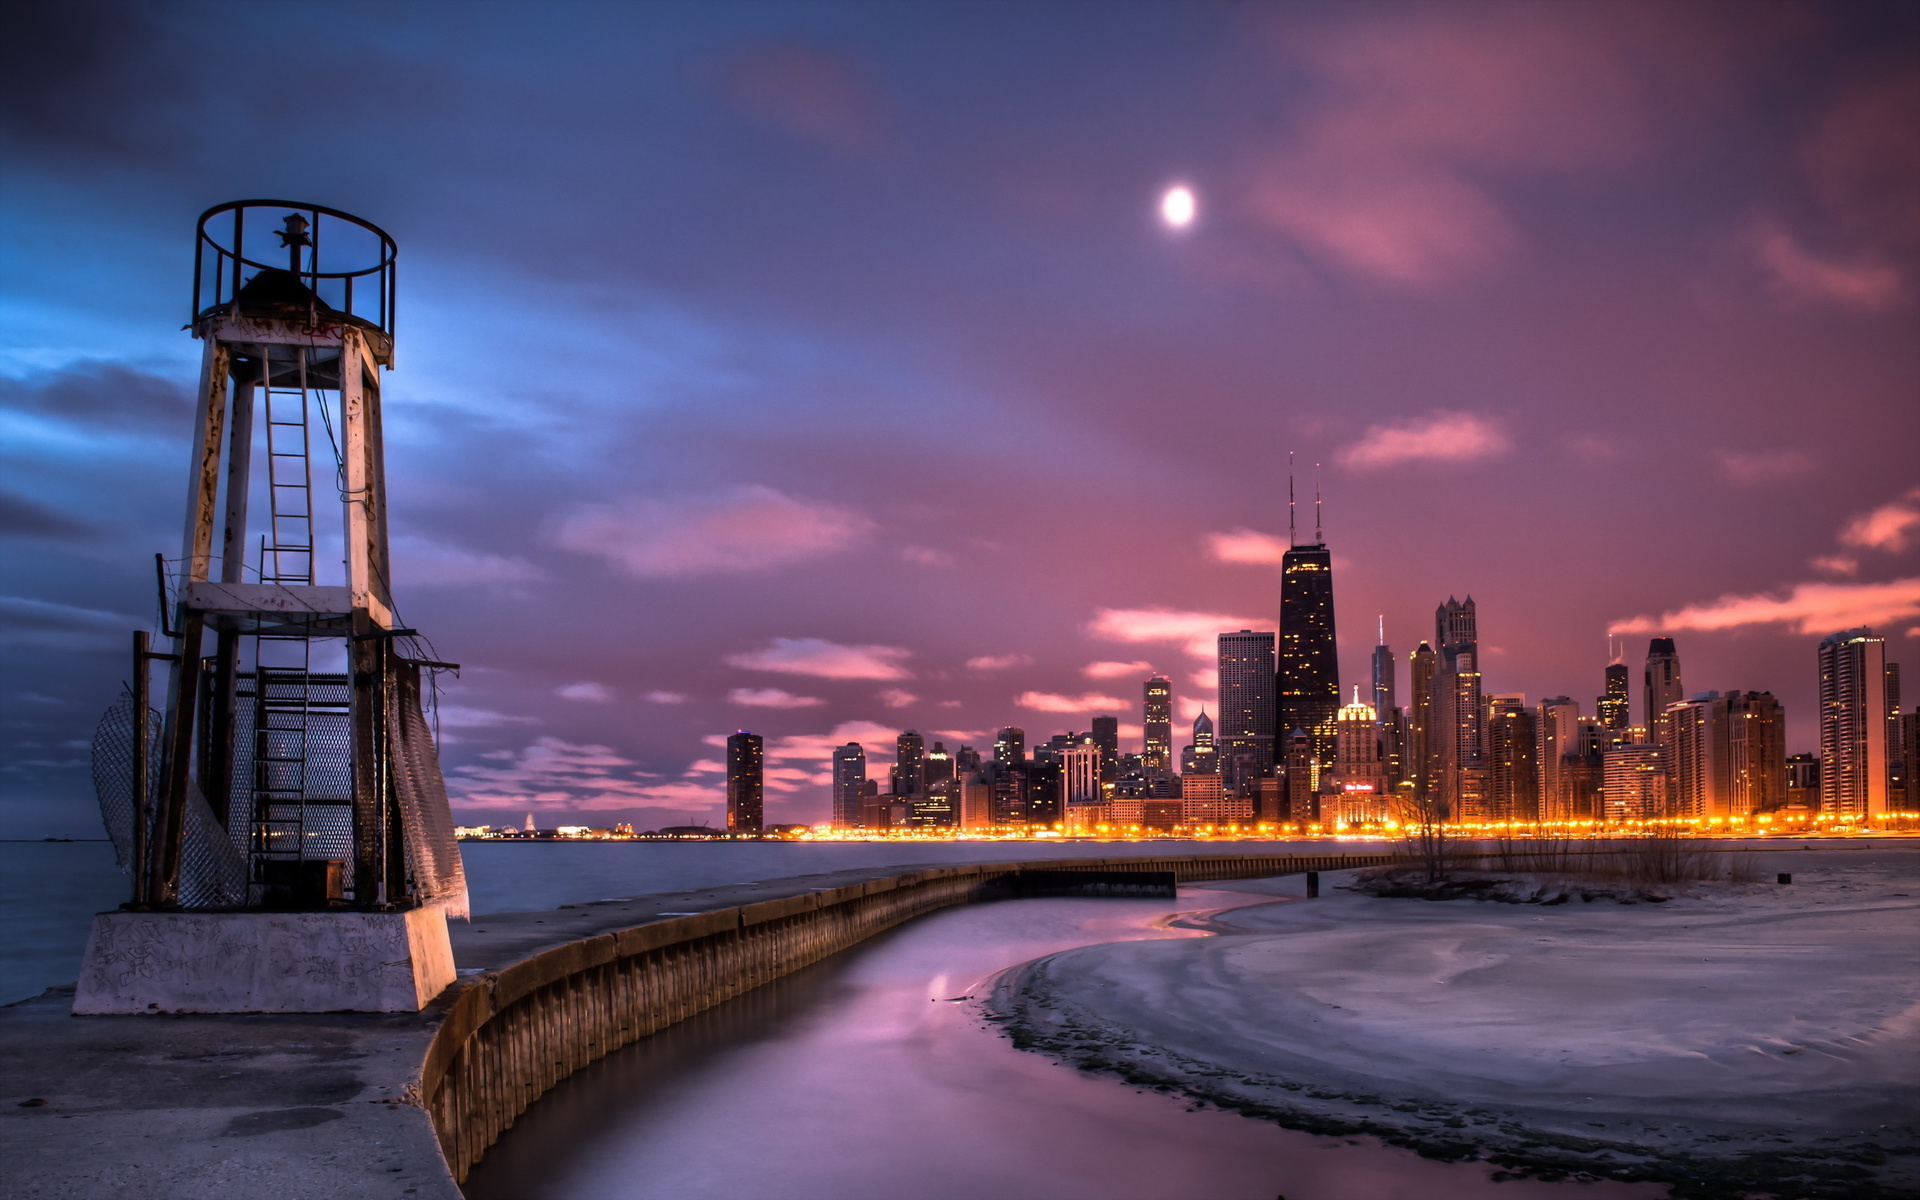 Chicago winter ice jetty lighthouse lakes night lights architecture 1920x1200